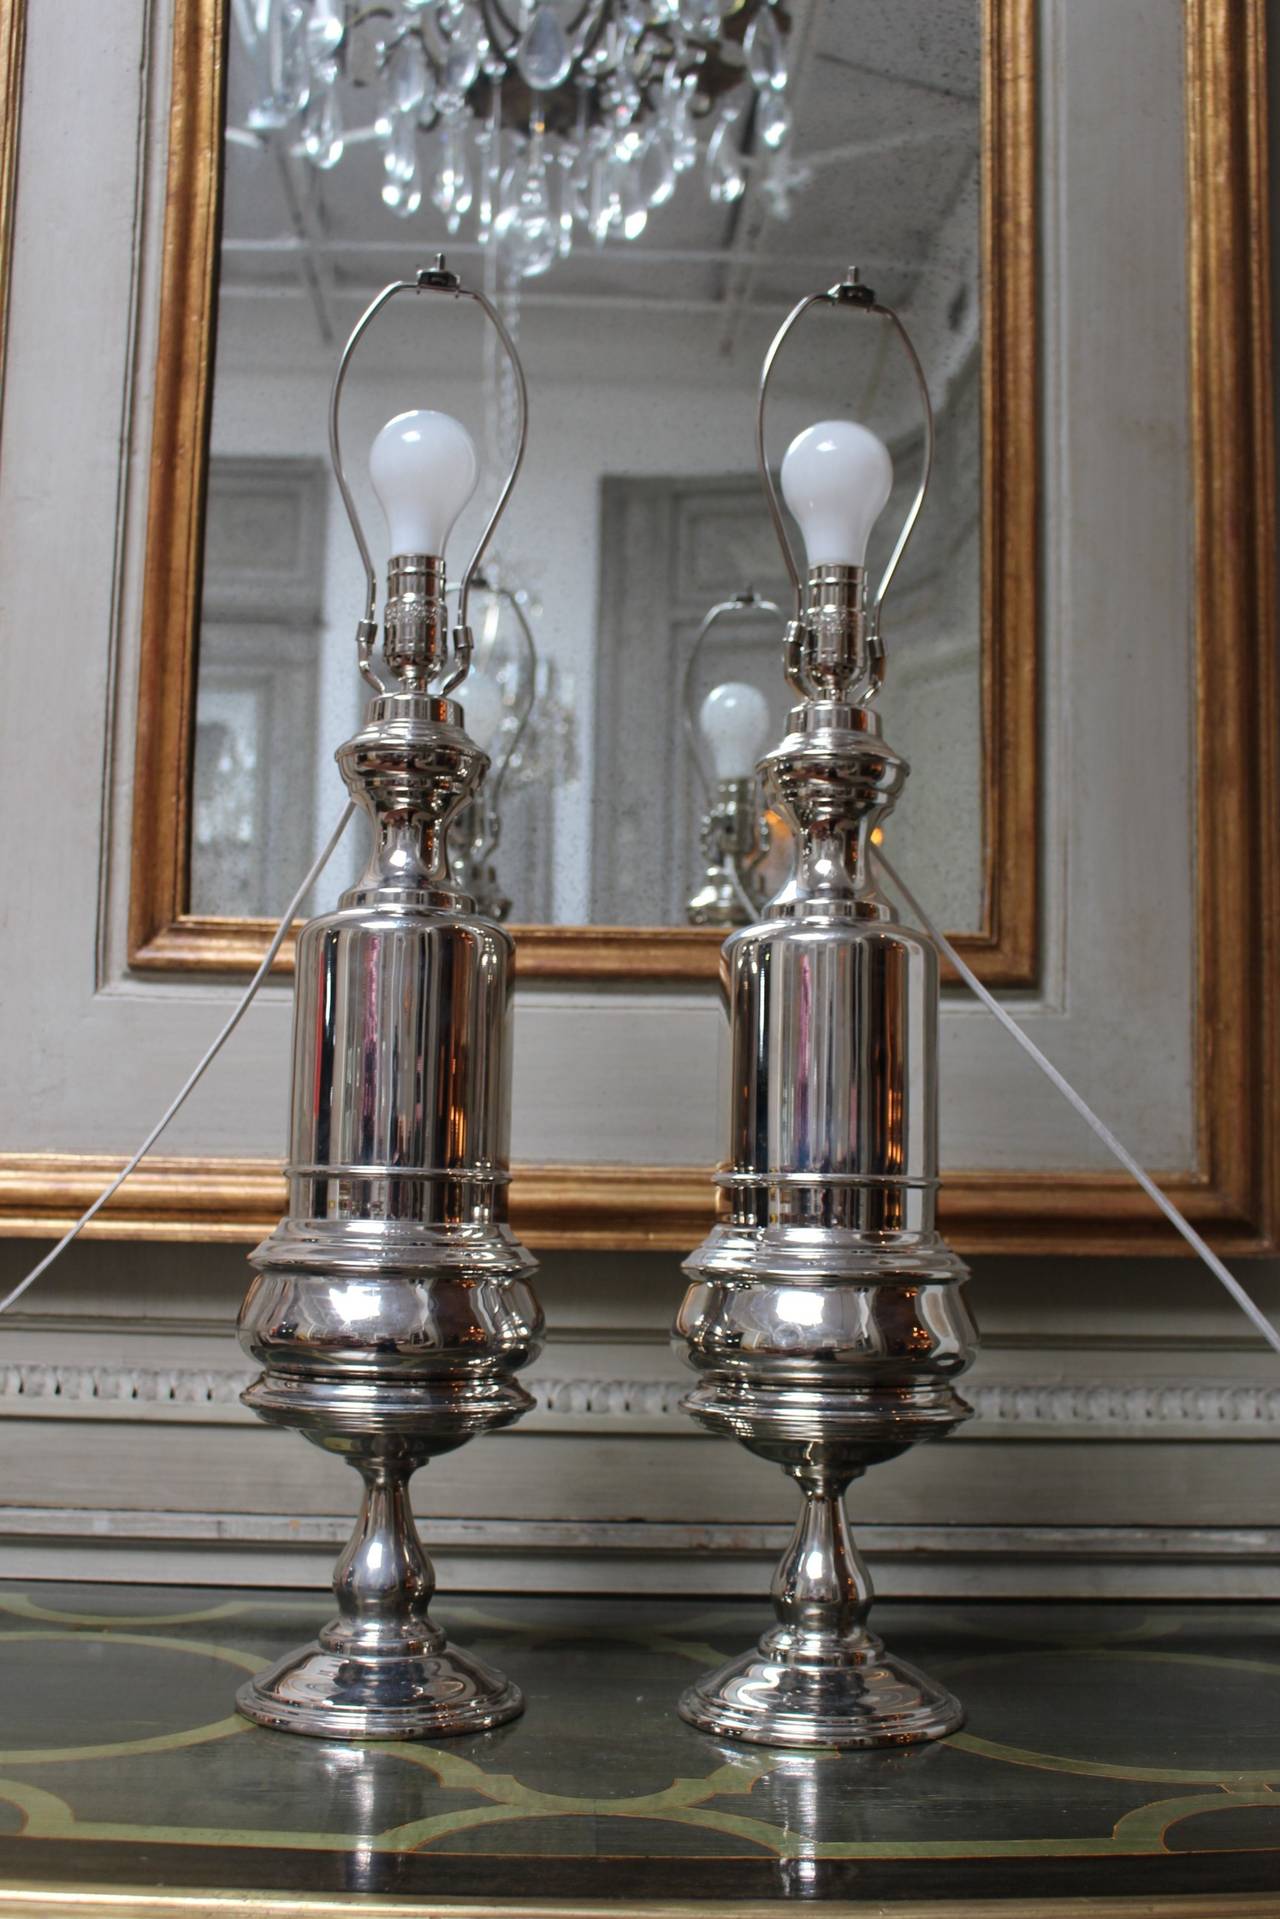 A pair of French 19th century lamp bases in nickel-plated bronze. They are in two pieces with the top resting on the lower base. These Mazarin style lamp bases were originally oil lamps and have been plated in the silver finish.